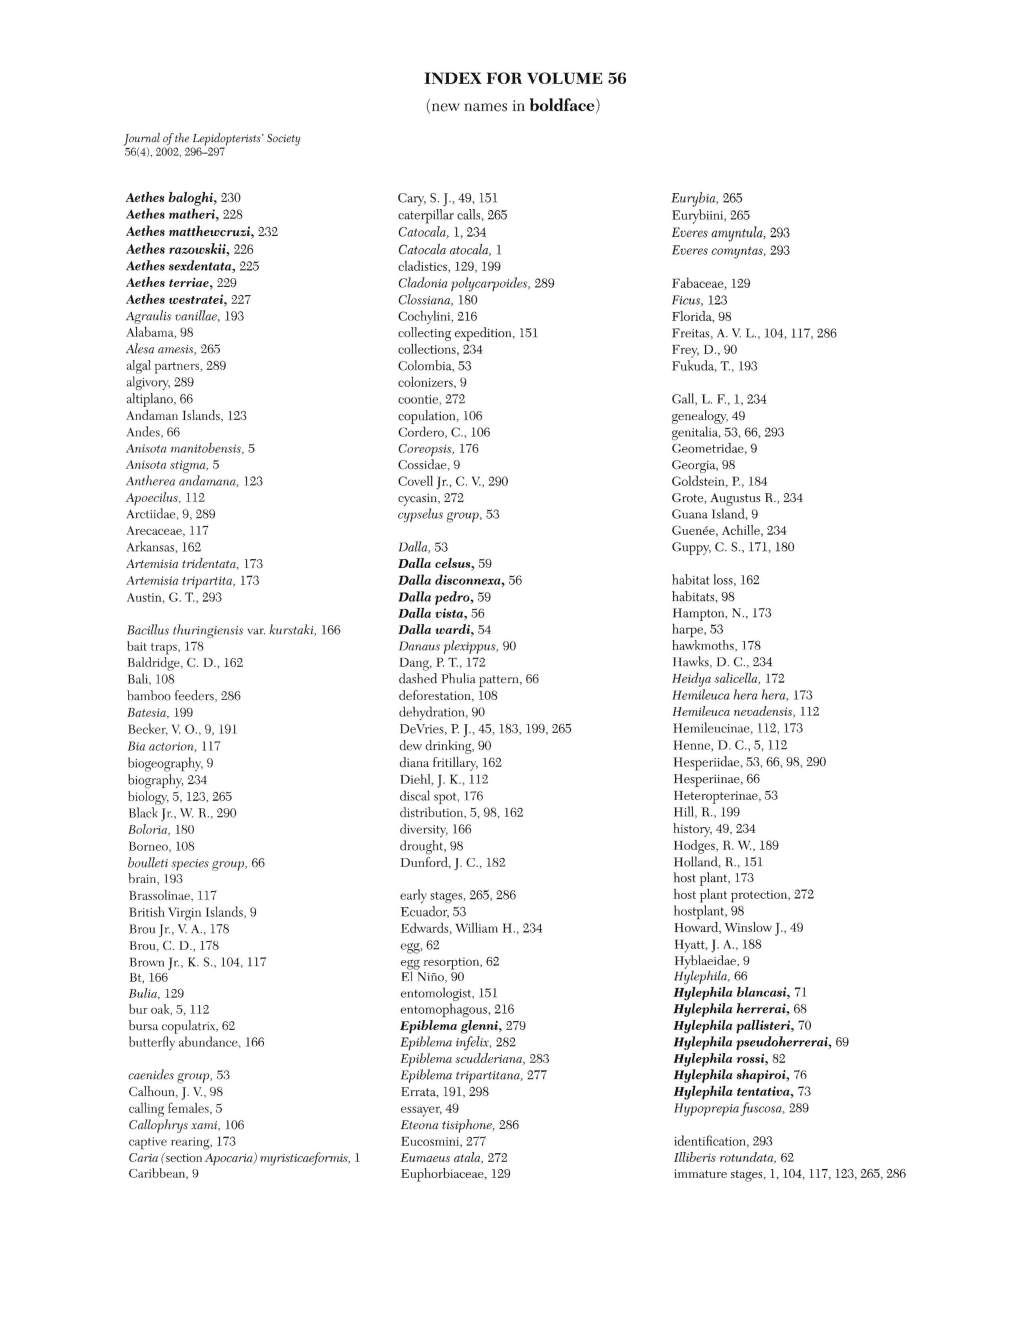 INDEX for VOLUME 56 (New Names in Boldface)